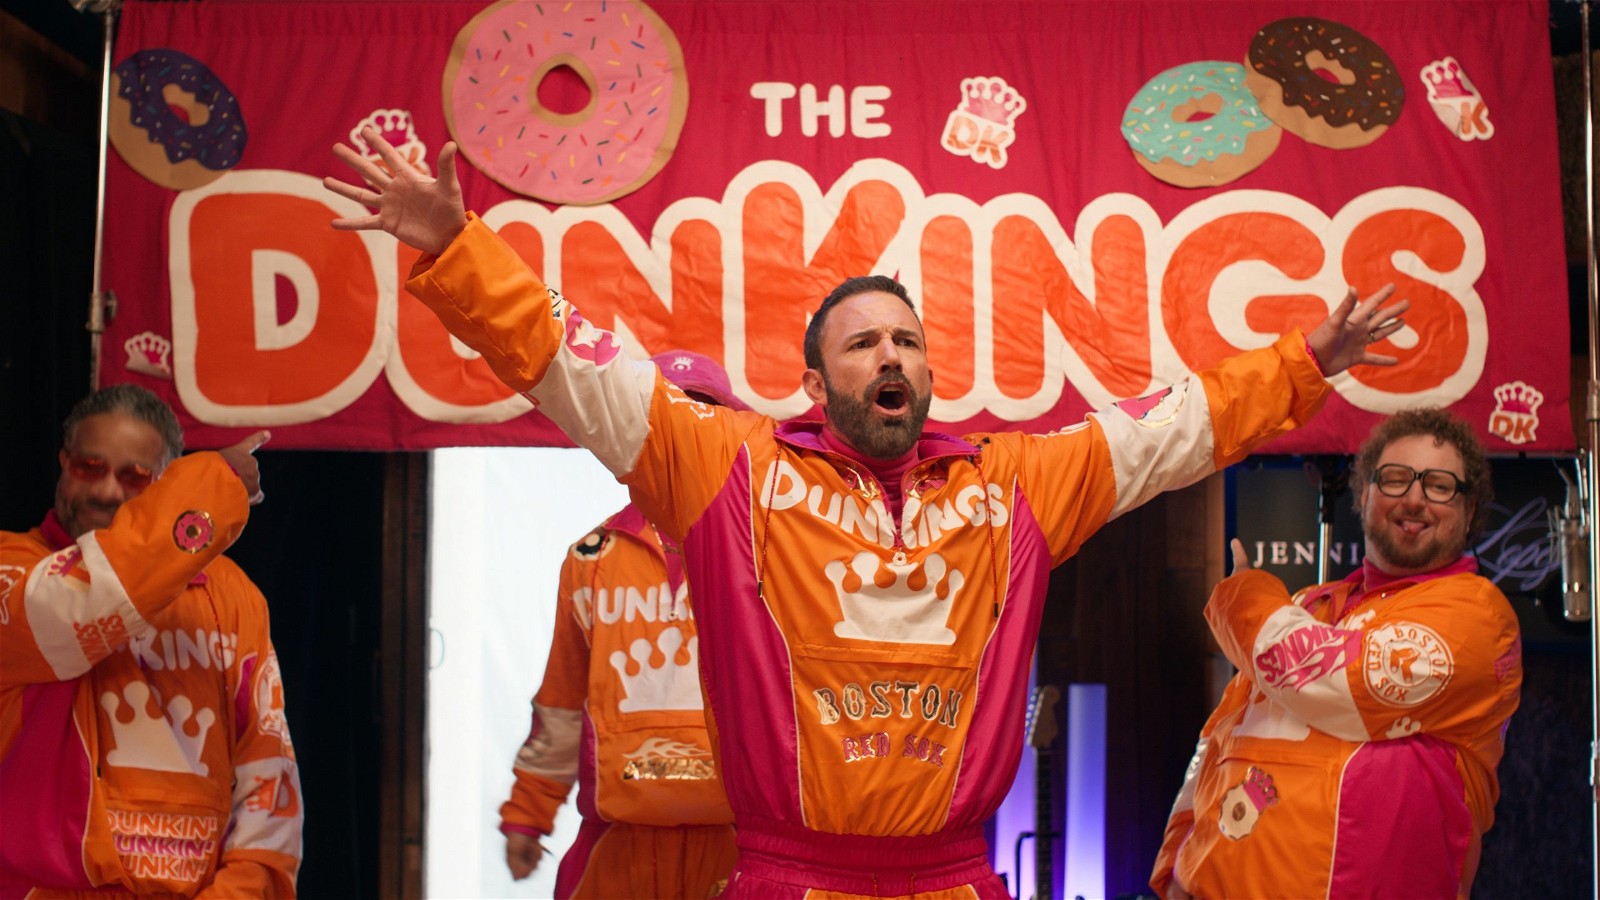 Ben Affleck in The DunKings | Credits: Dunkin' Donuts